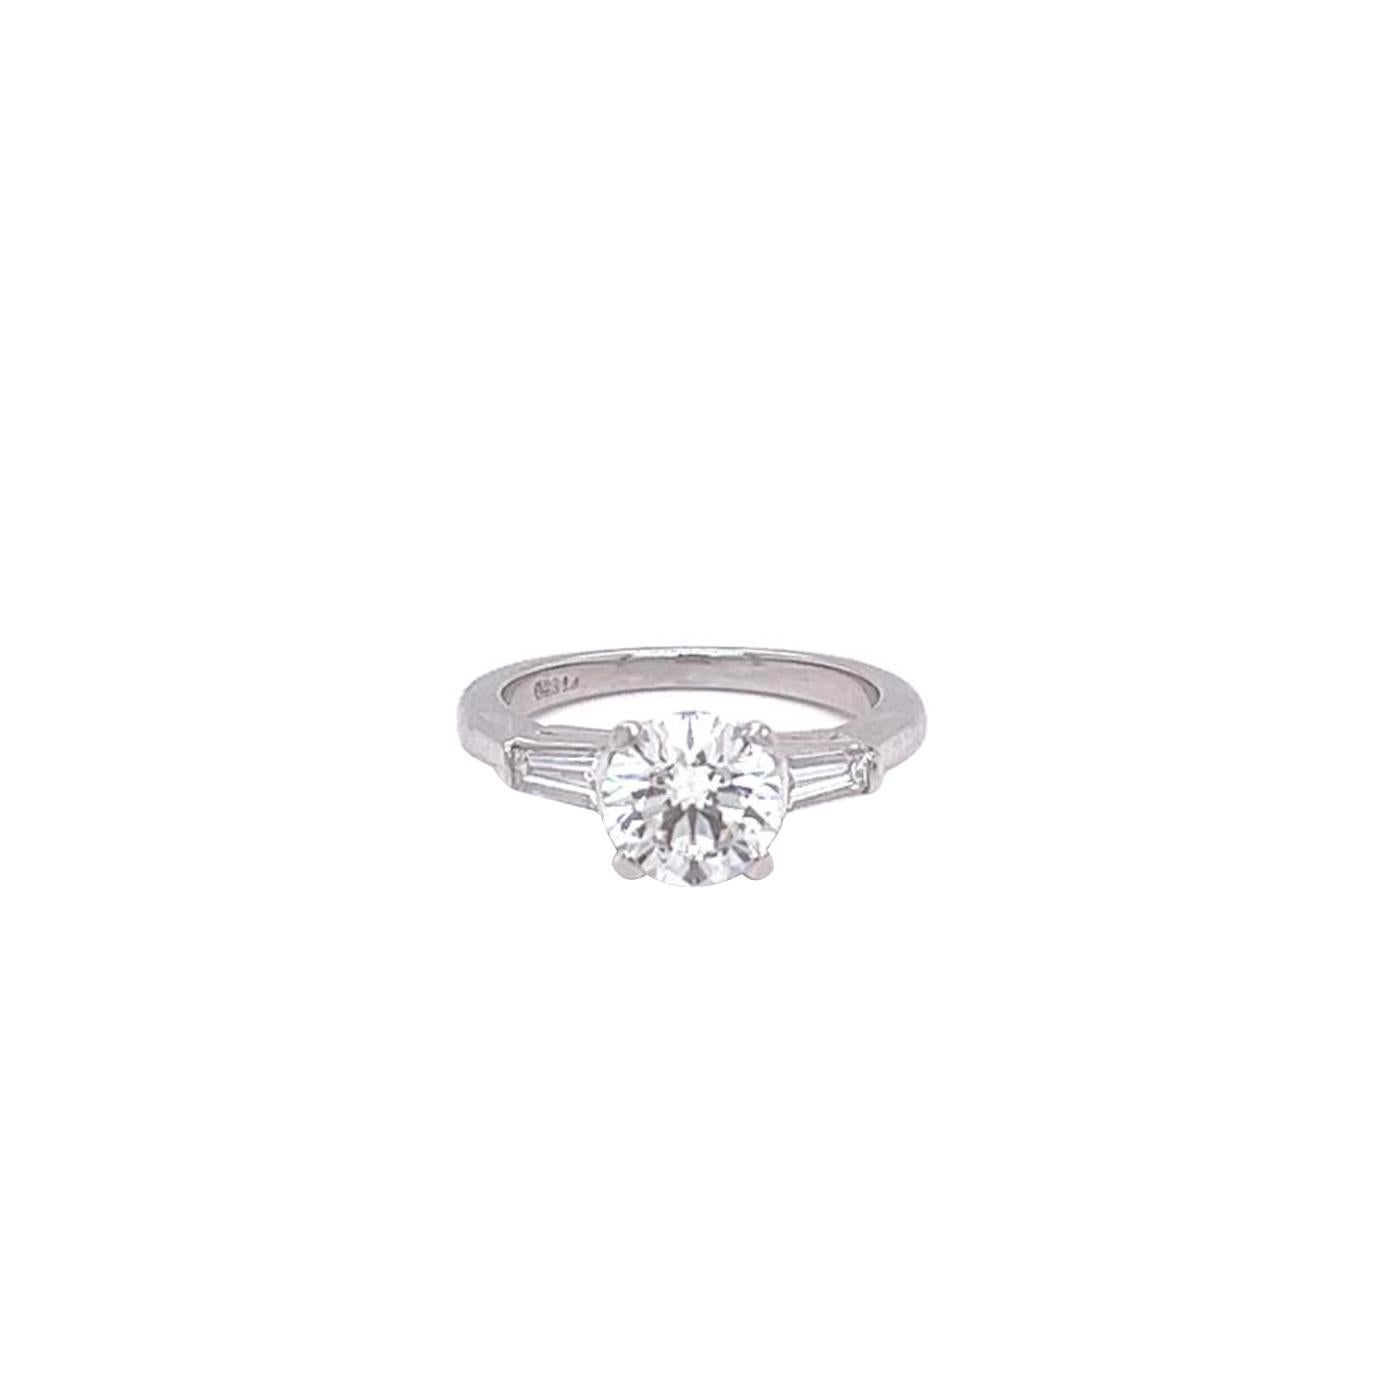 Inspired by one of the world’s most iconic styles, This Natural Round Engagement Ring is a true design masterpiece. Flawlessly created, This diamond ring is a timeless symbol of enduring beauty, destined to be treasured for generations to come. This